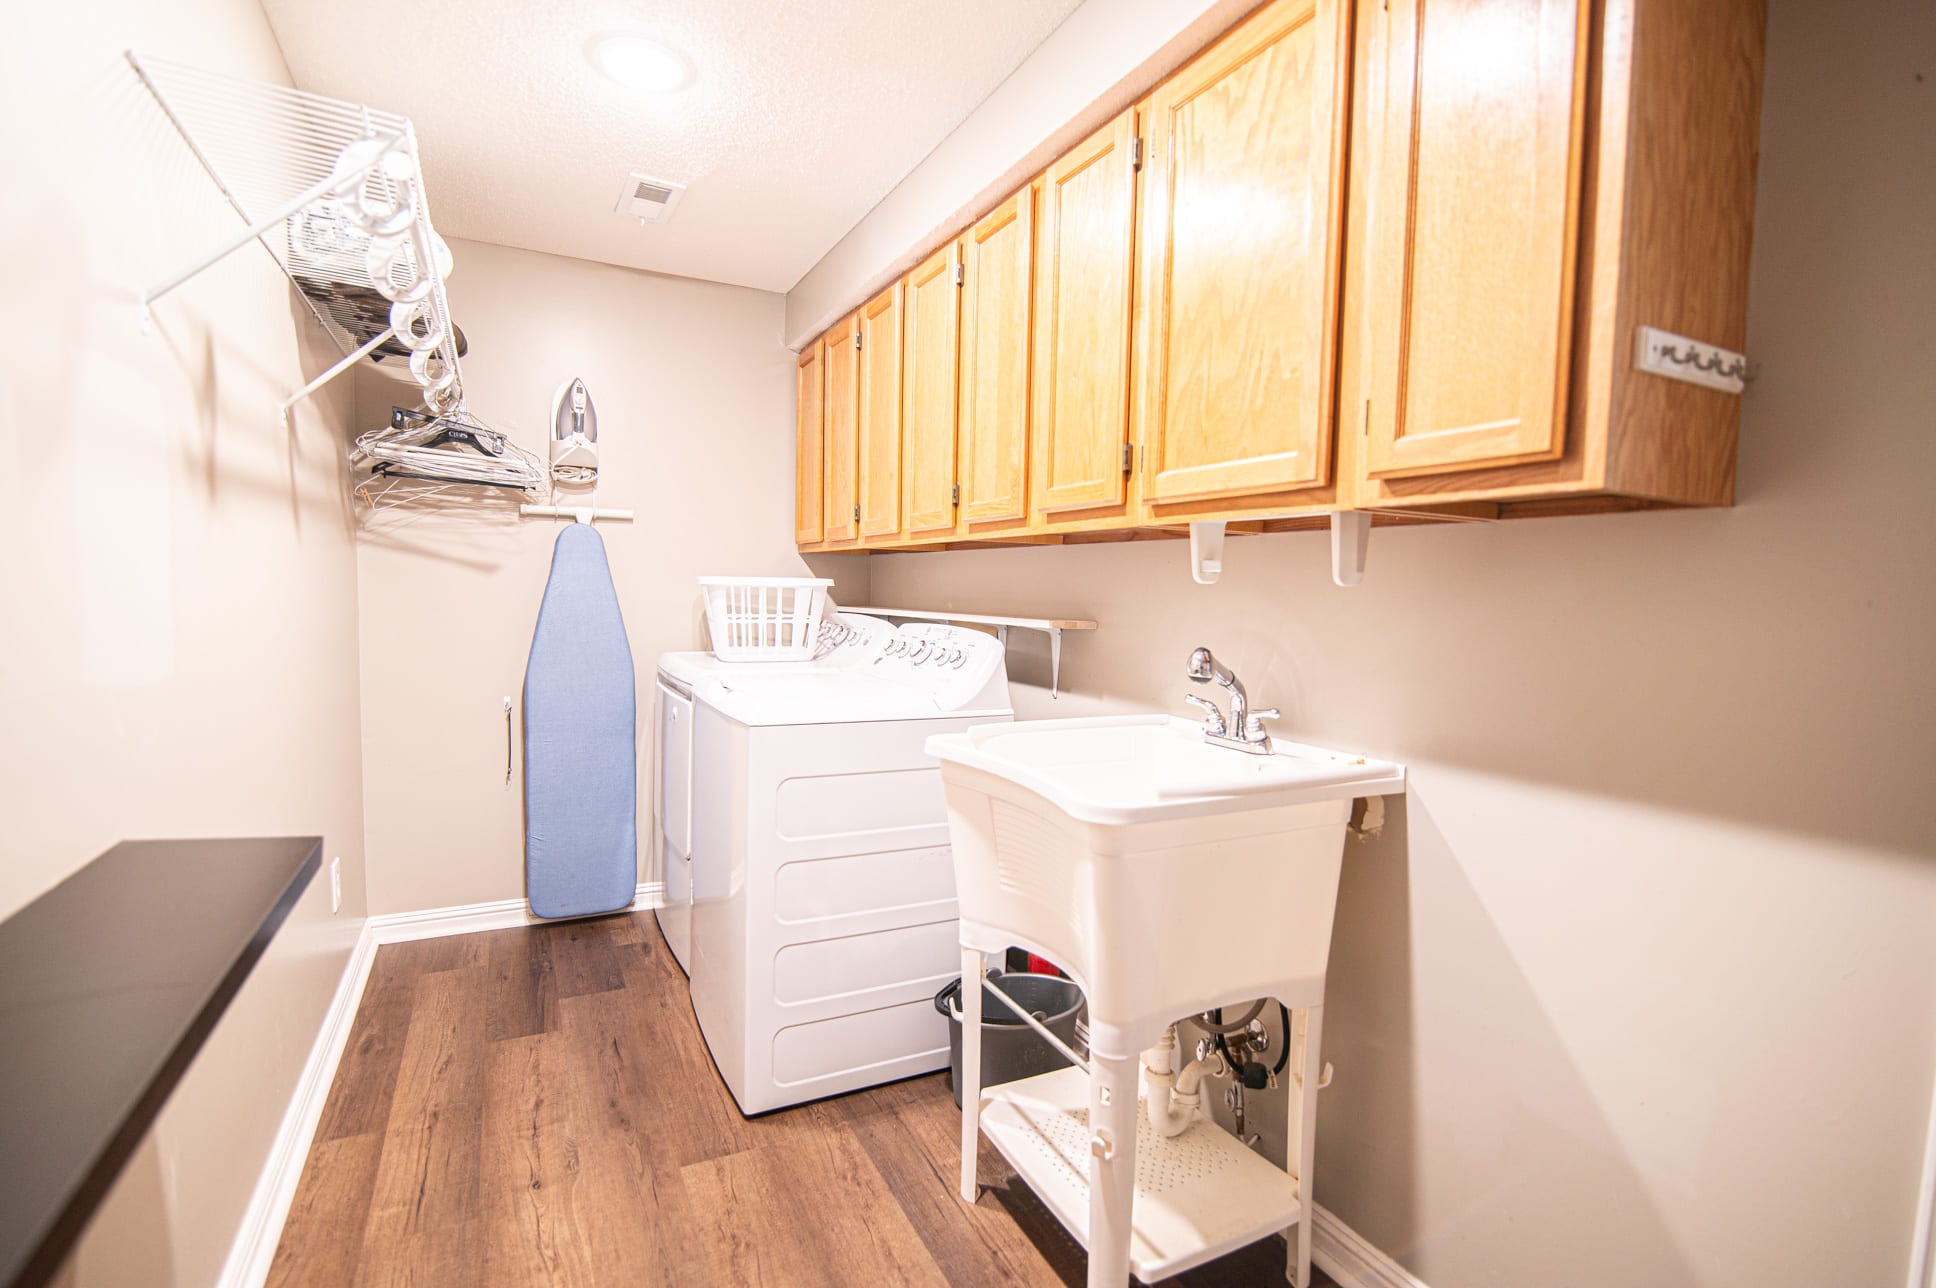 Washer and Dryer Laundry Room